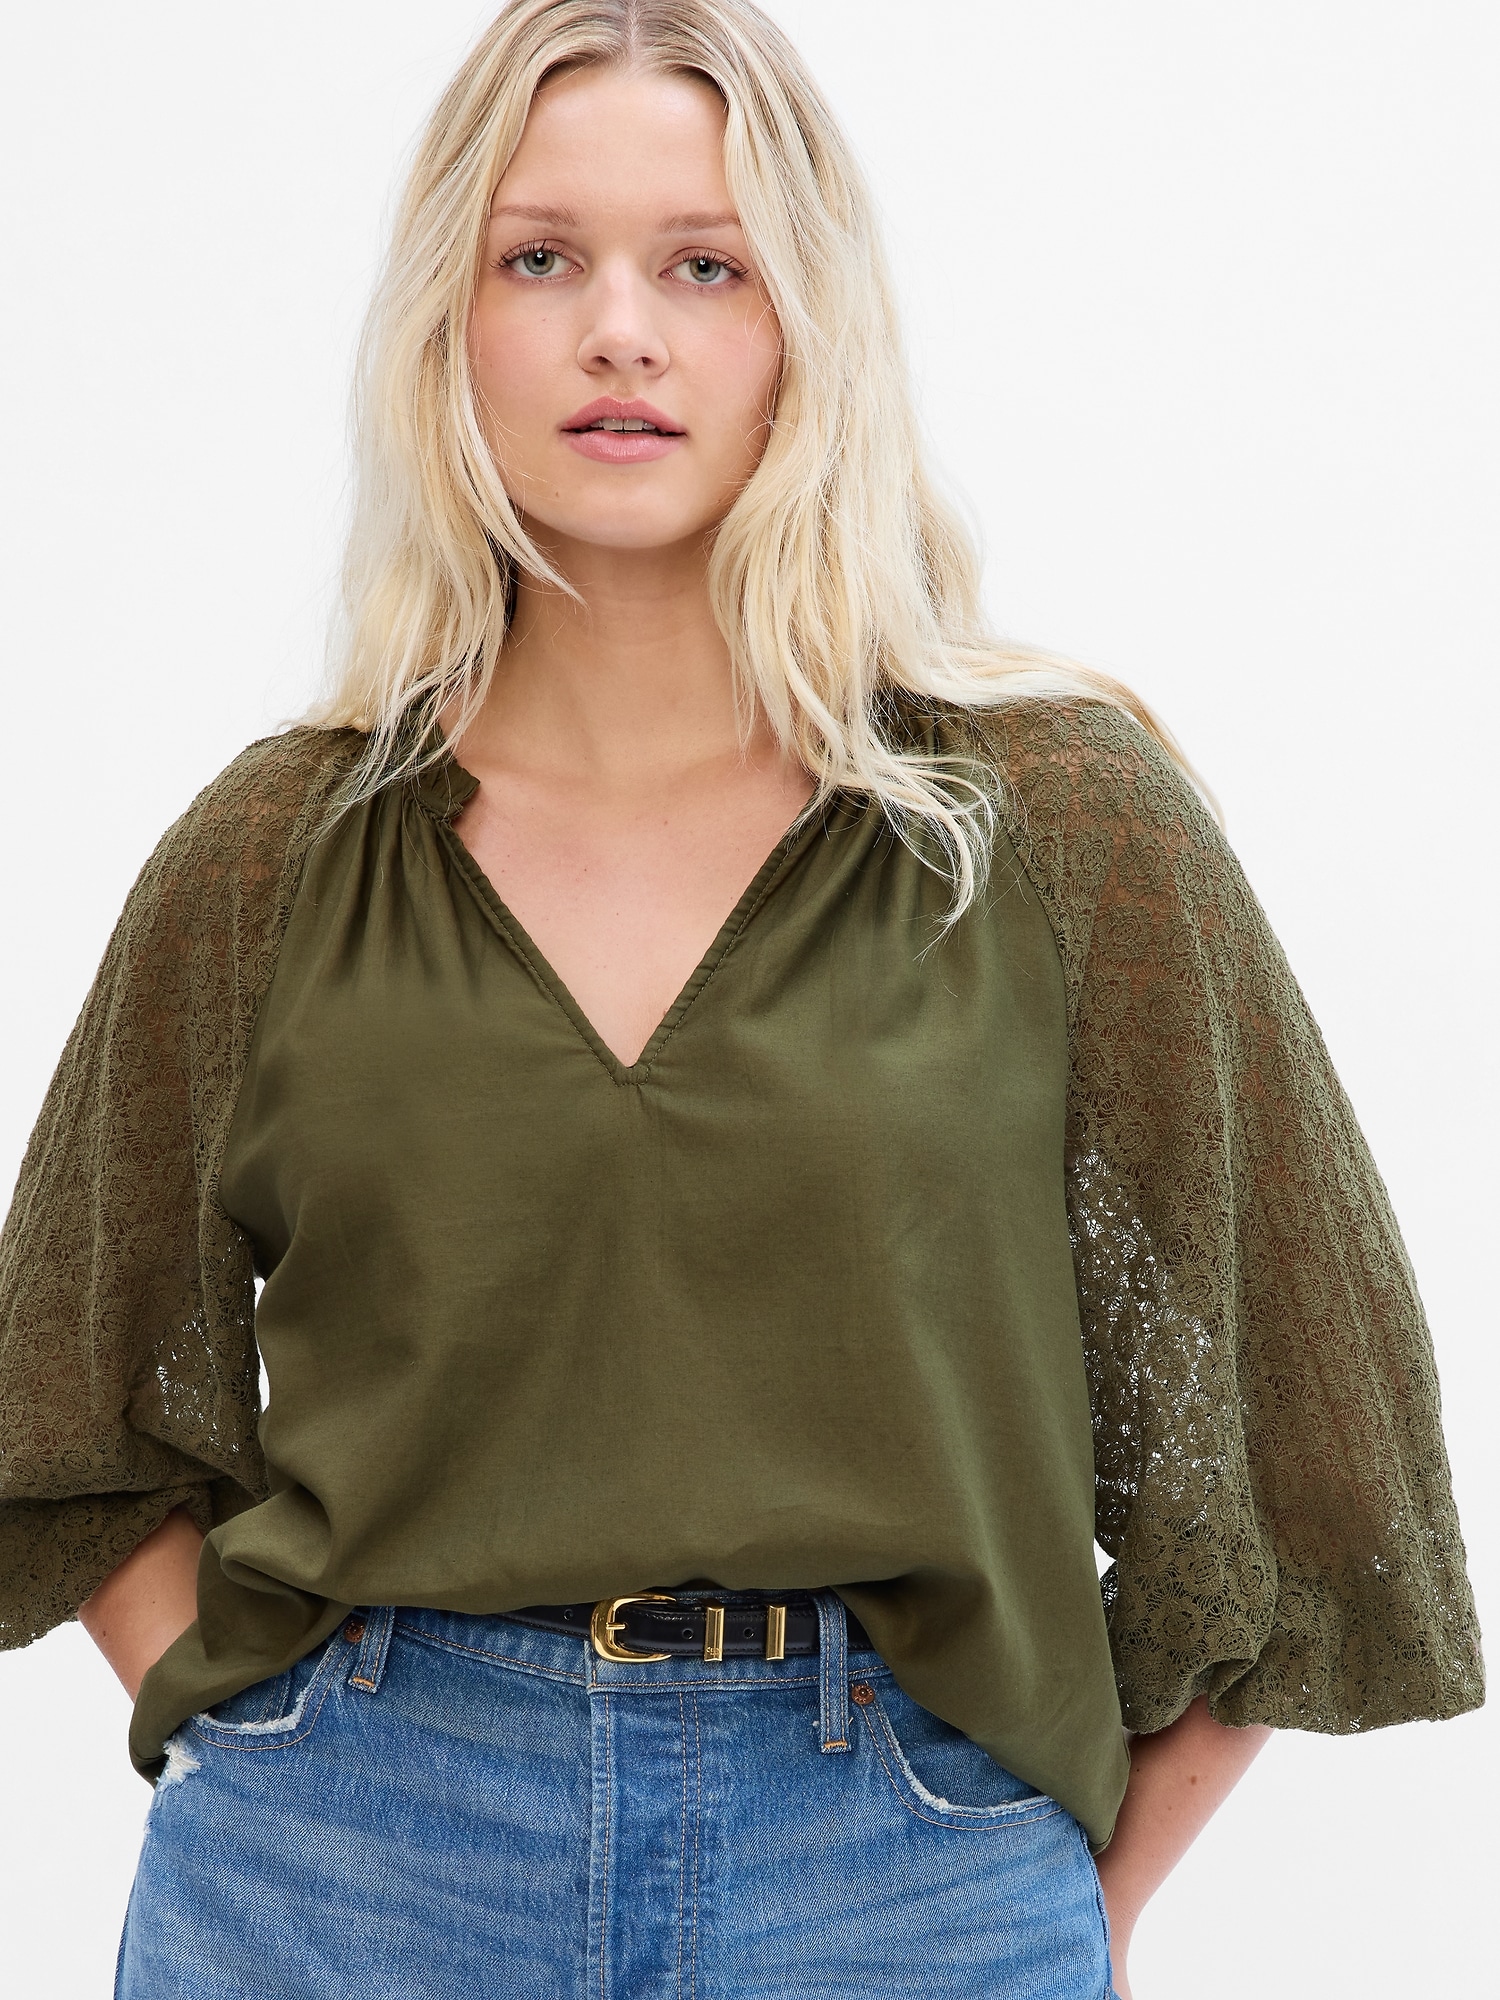 Lace Sleeve Top | Gap